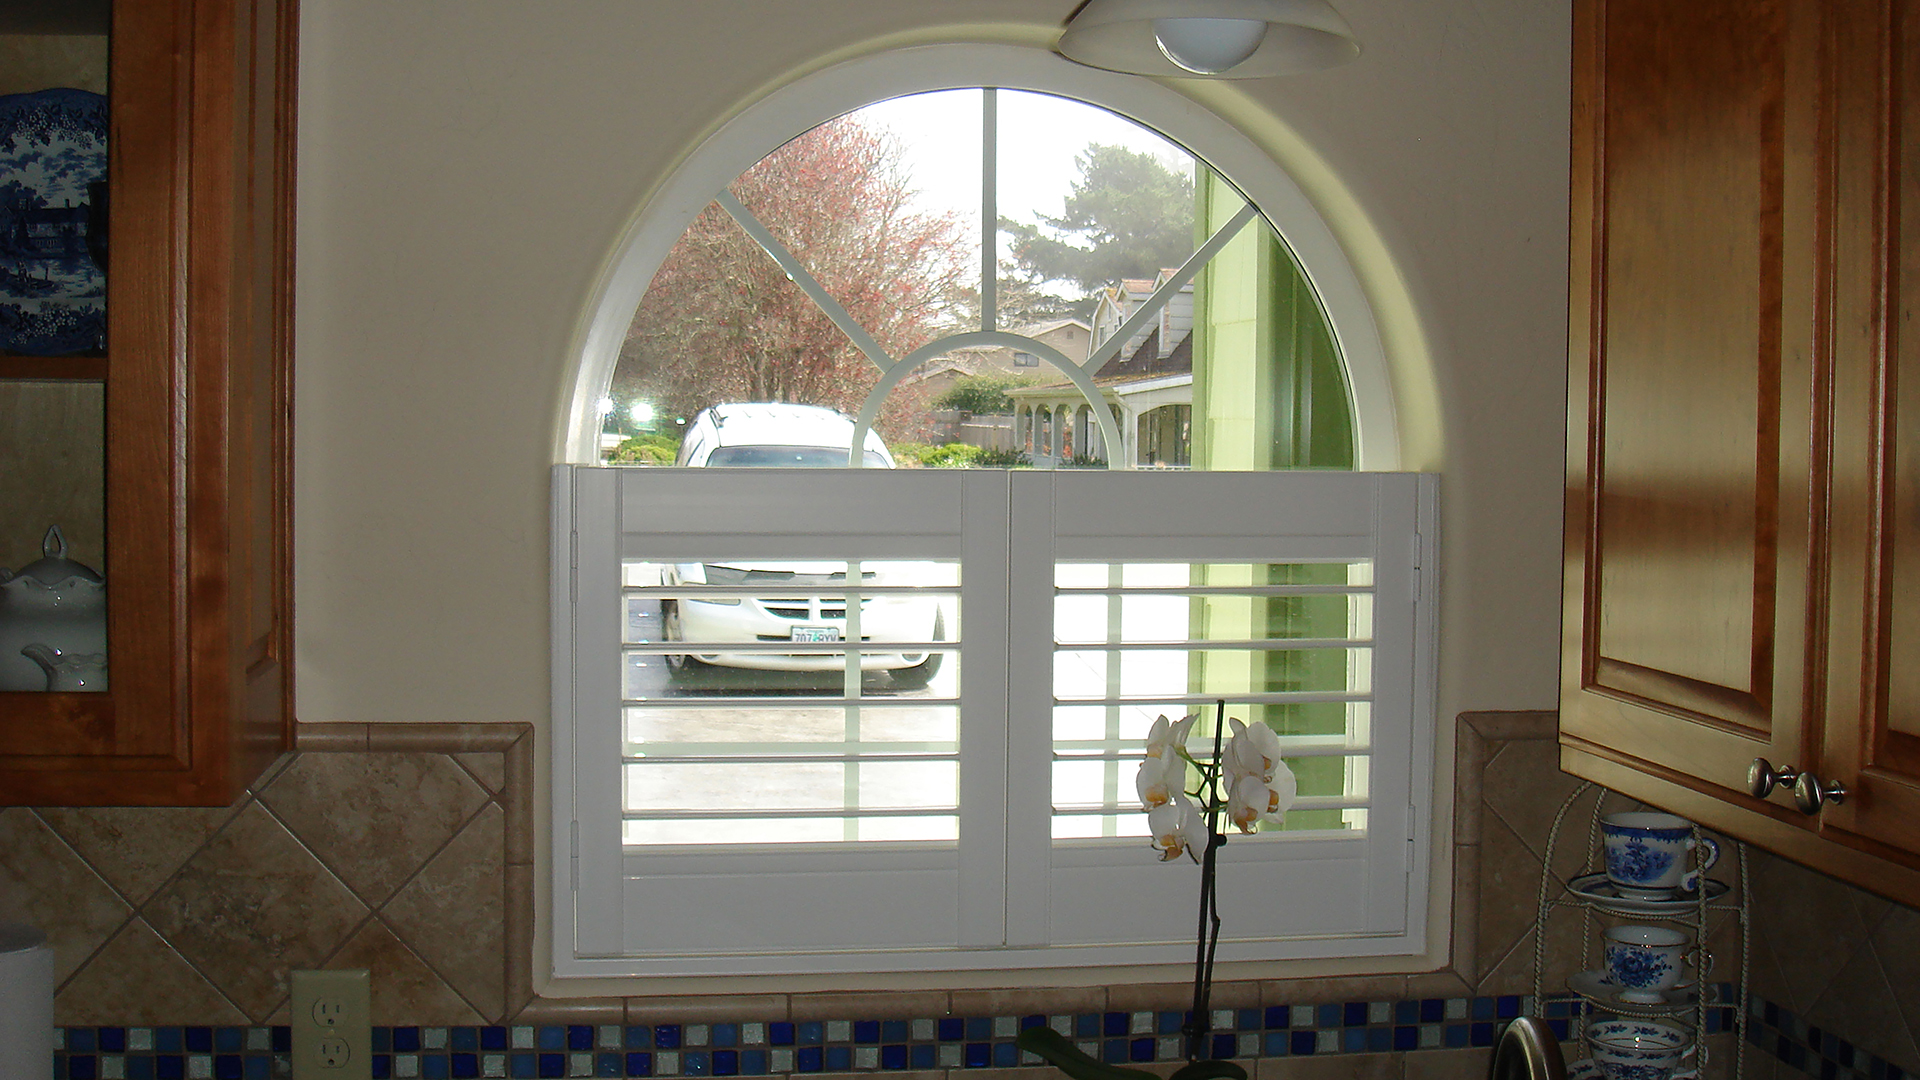 Cafe Style Vinyl Shutter in arched window.jpg